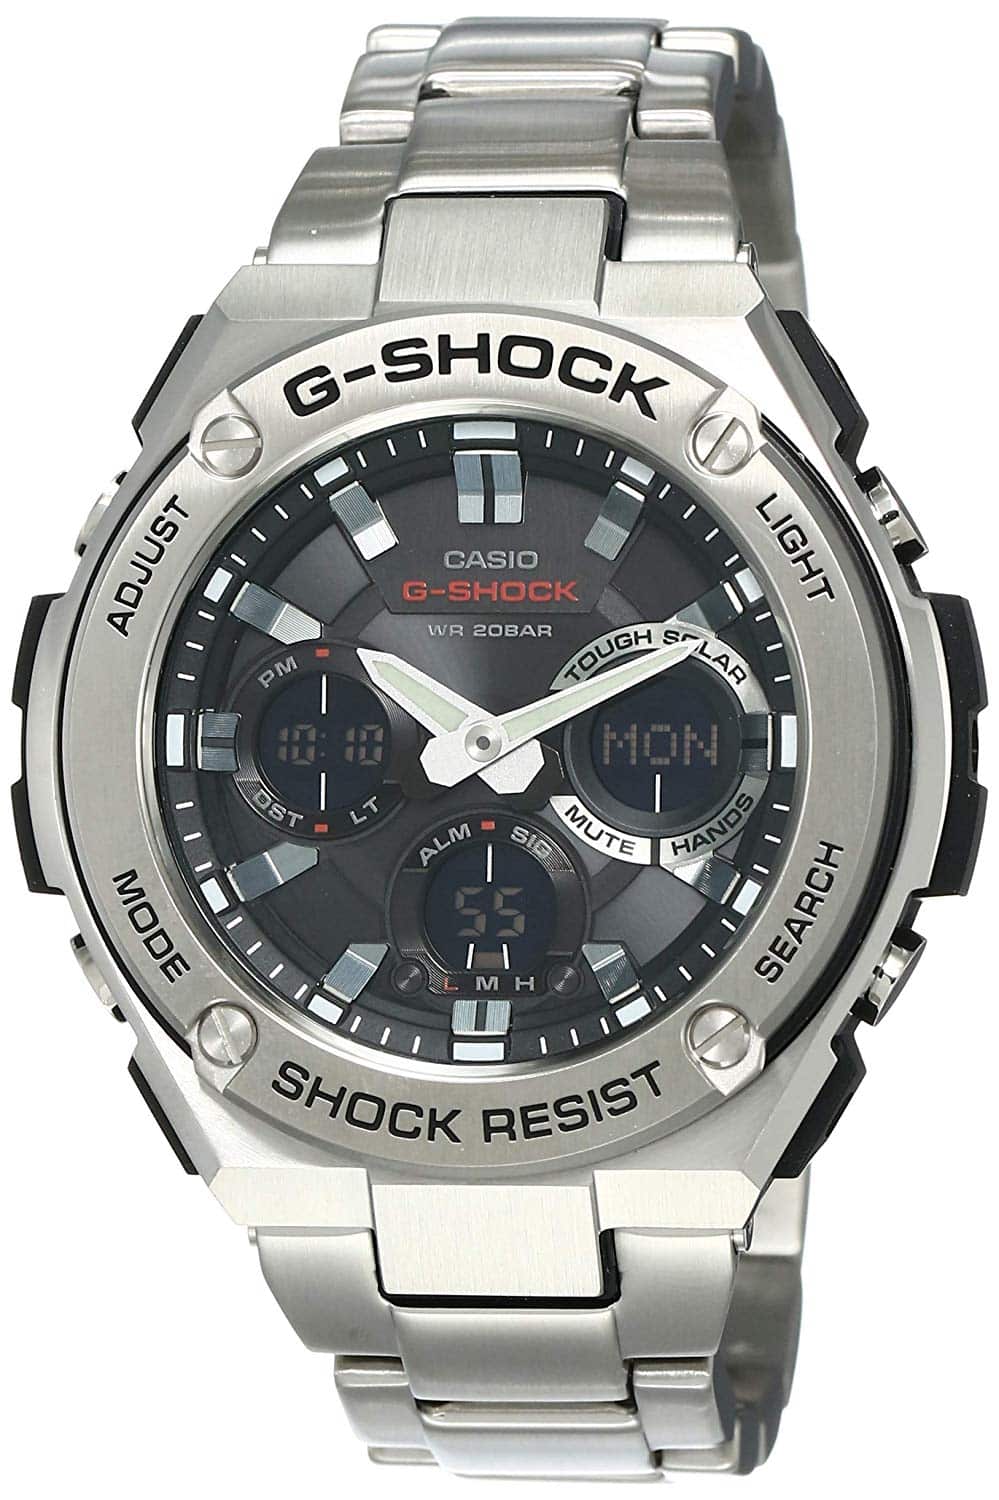 Top 10 Best G Shock Military Watches in 2021 Reviews | Buyer's Guide